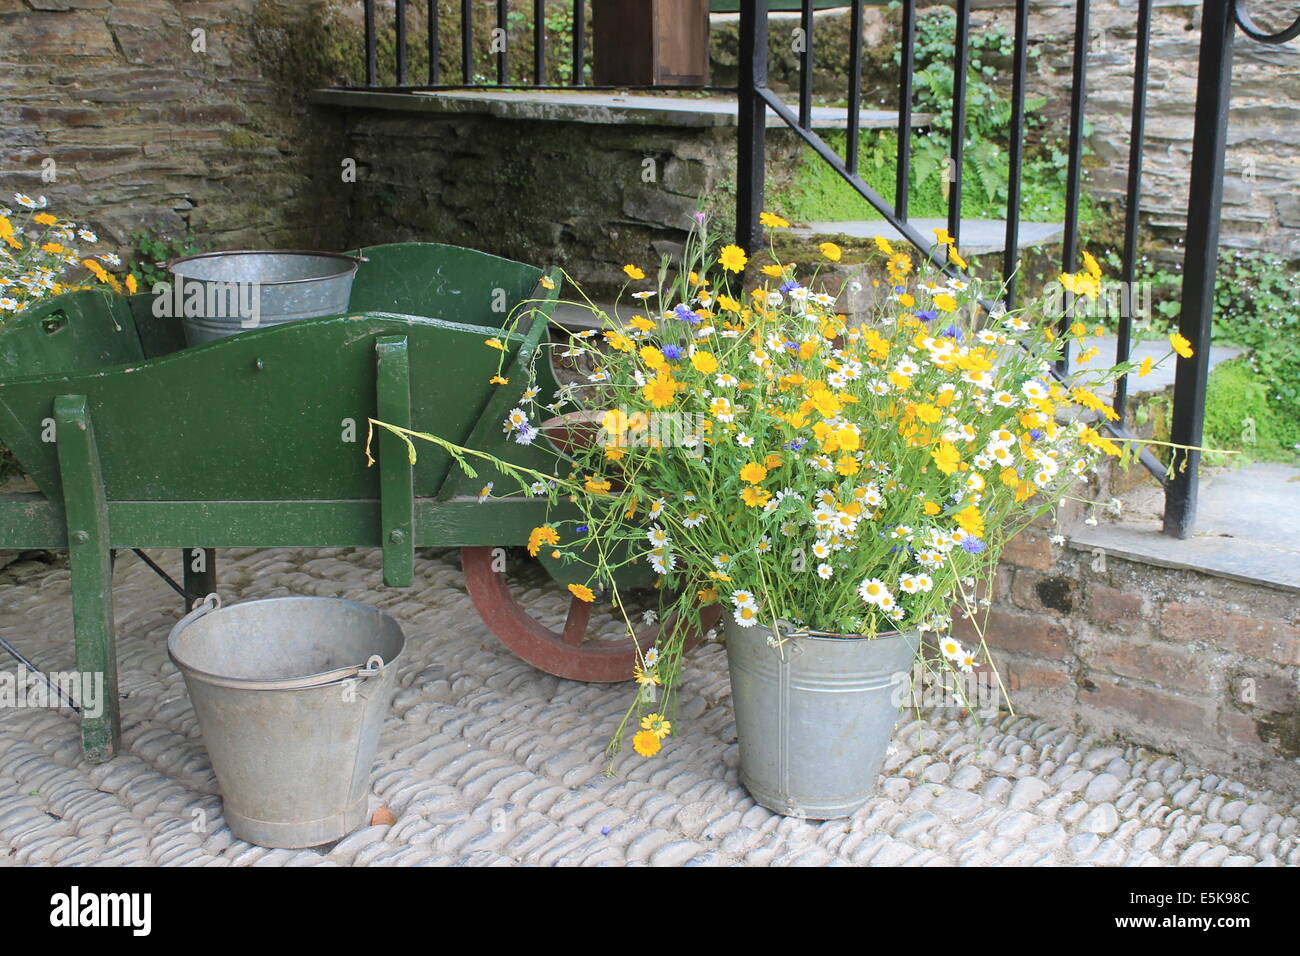 A spray of wildflowers and old wooden wheelbarrow in a courtyard corner at The Lost Gardens of Heligan, Cornwall, England, UK Stock Photo